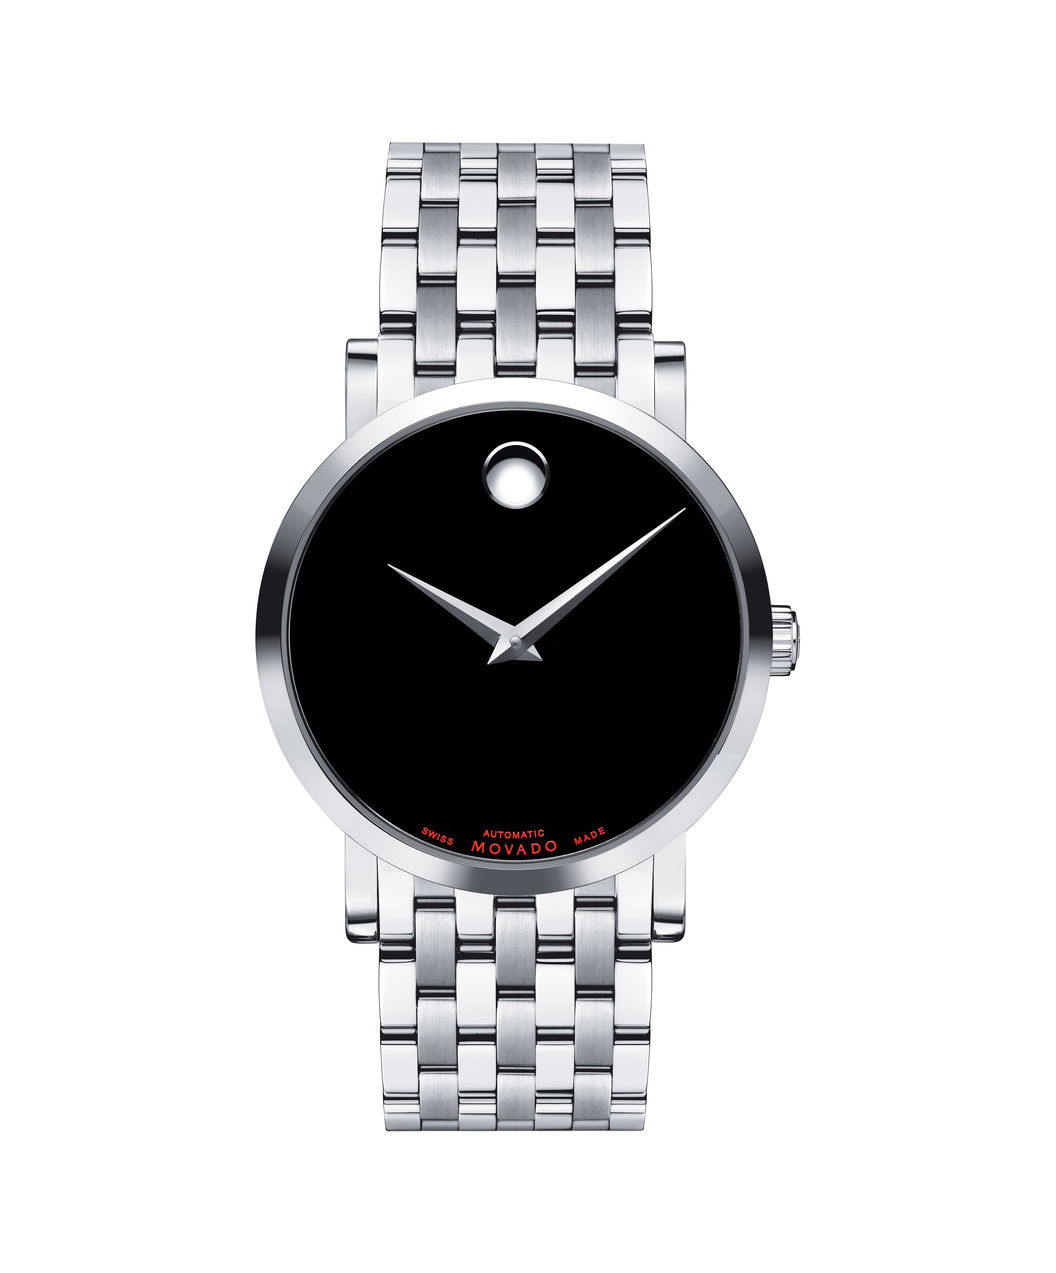 0606115 Movado Men's Red Label automatic watch